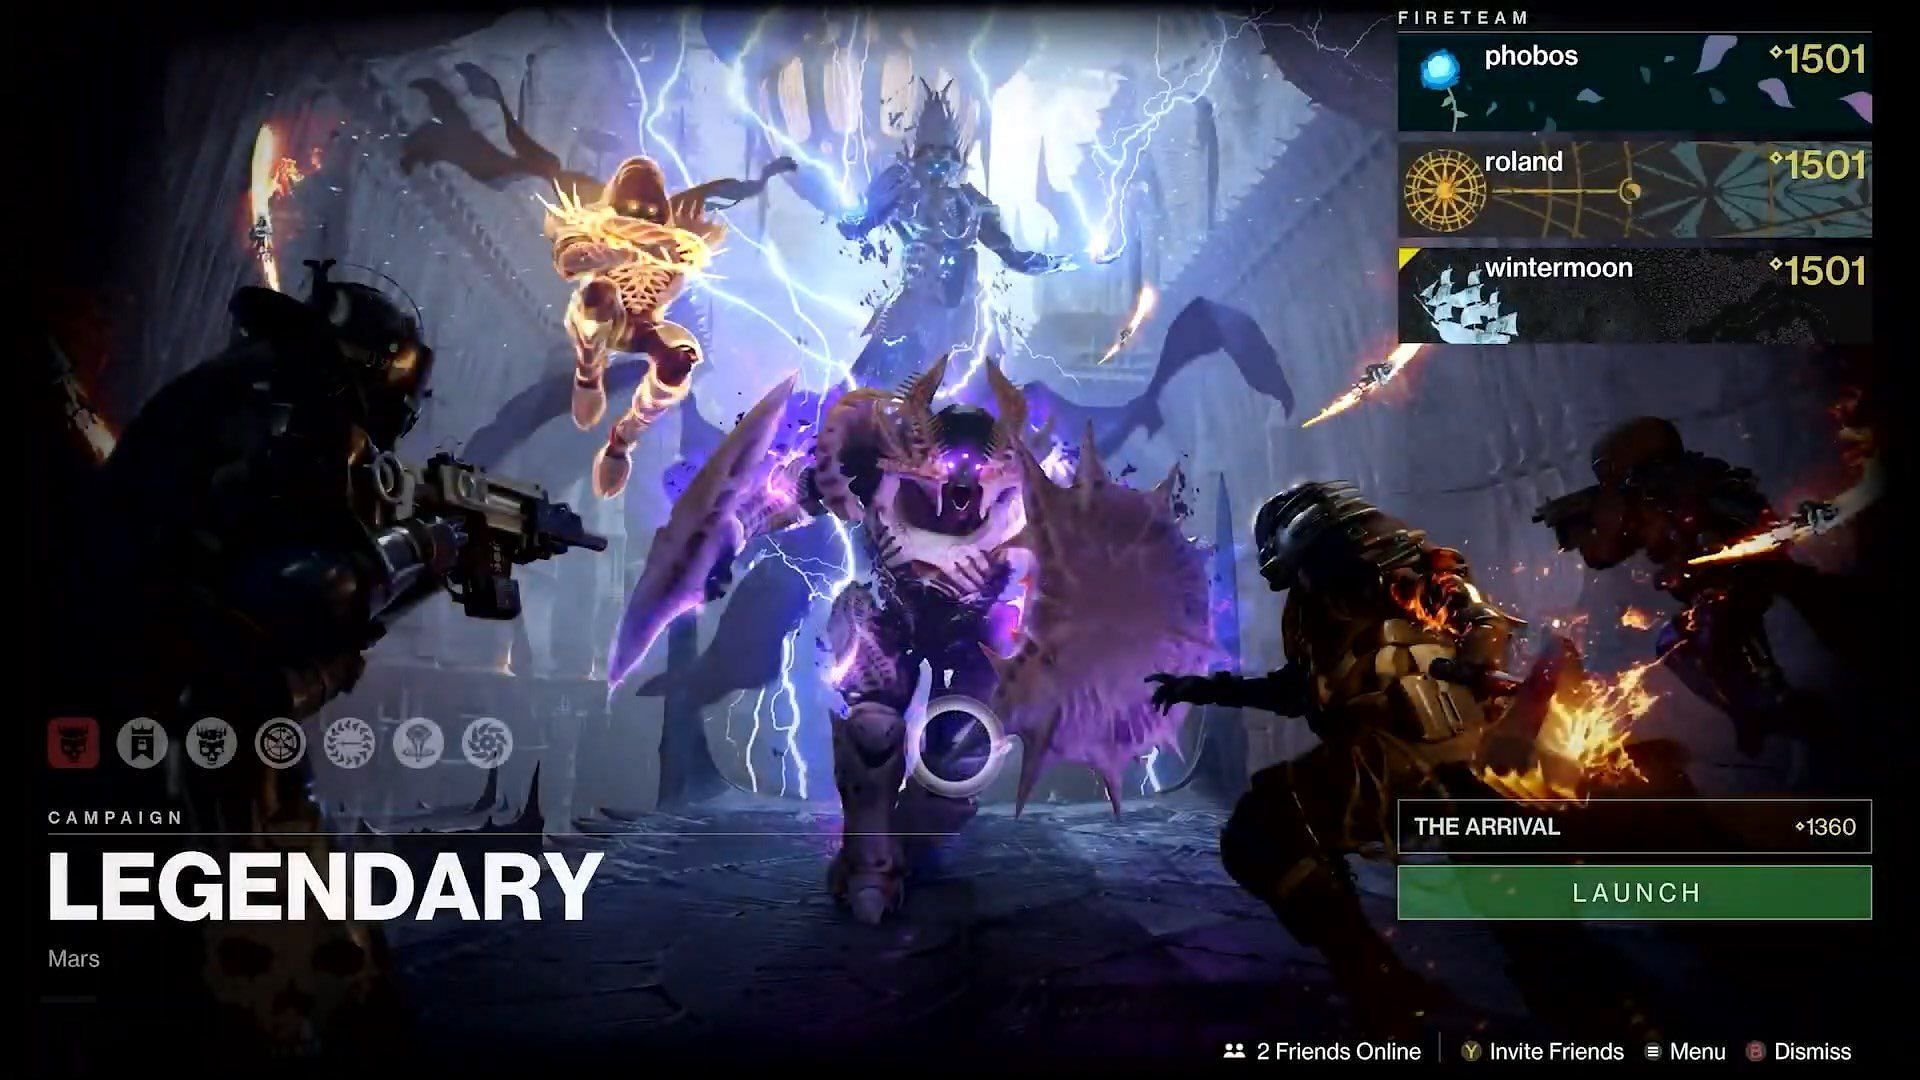 First look at the Legendary campaign of The Witch Queen (Image via Bungie)